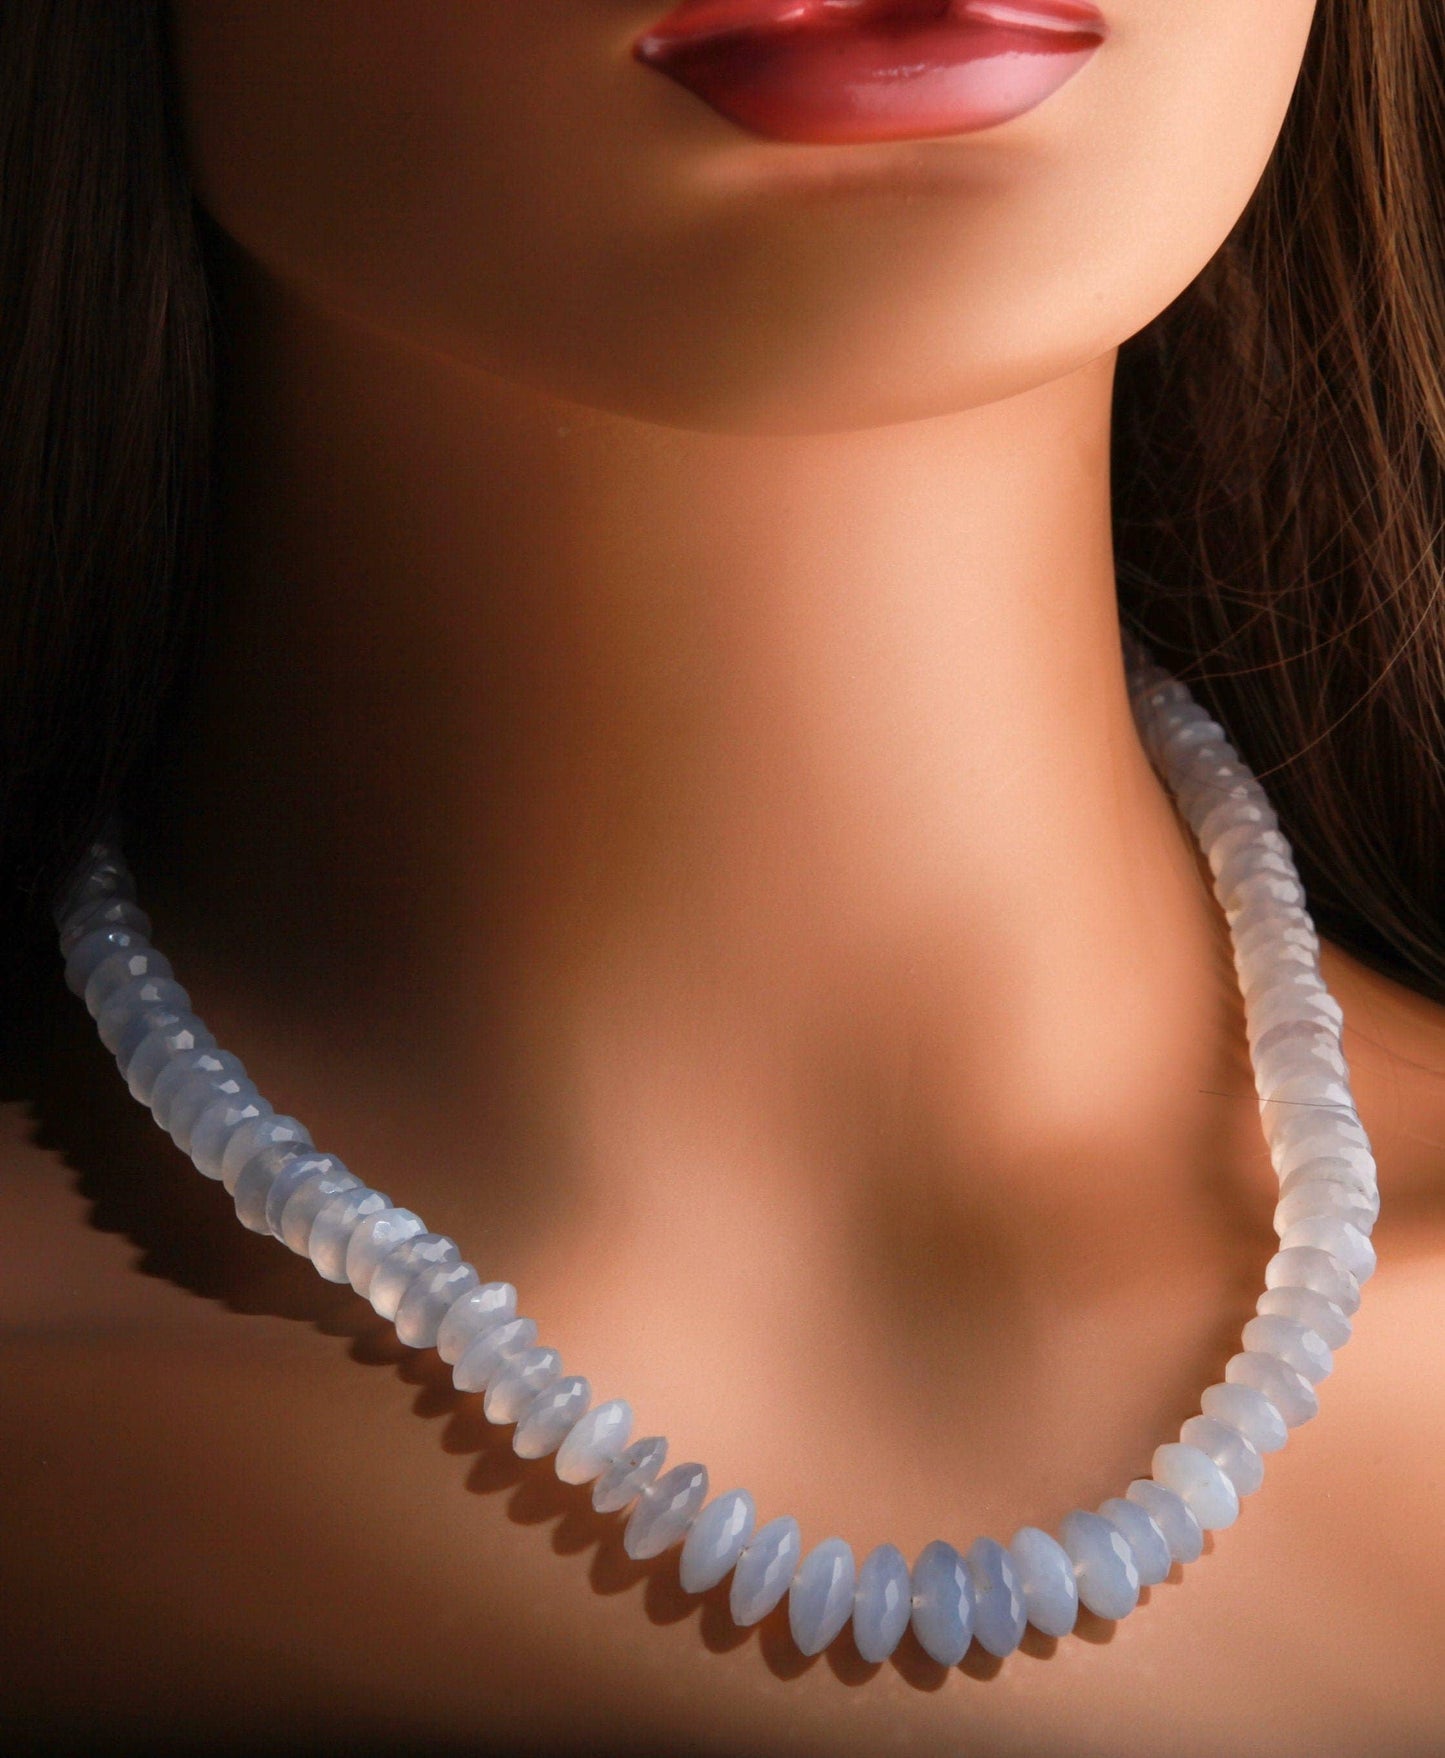 Natural Chalcedony sky blue AAA Quality German Cut Faceted Rondelle 7-12mm Graduated 17&quot; Necklace 2.5&quot; Extension Chain, precious gift.